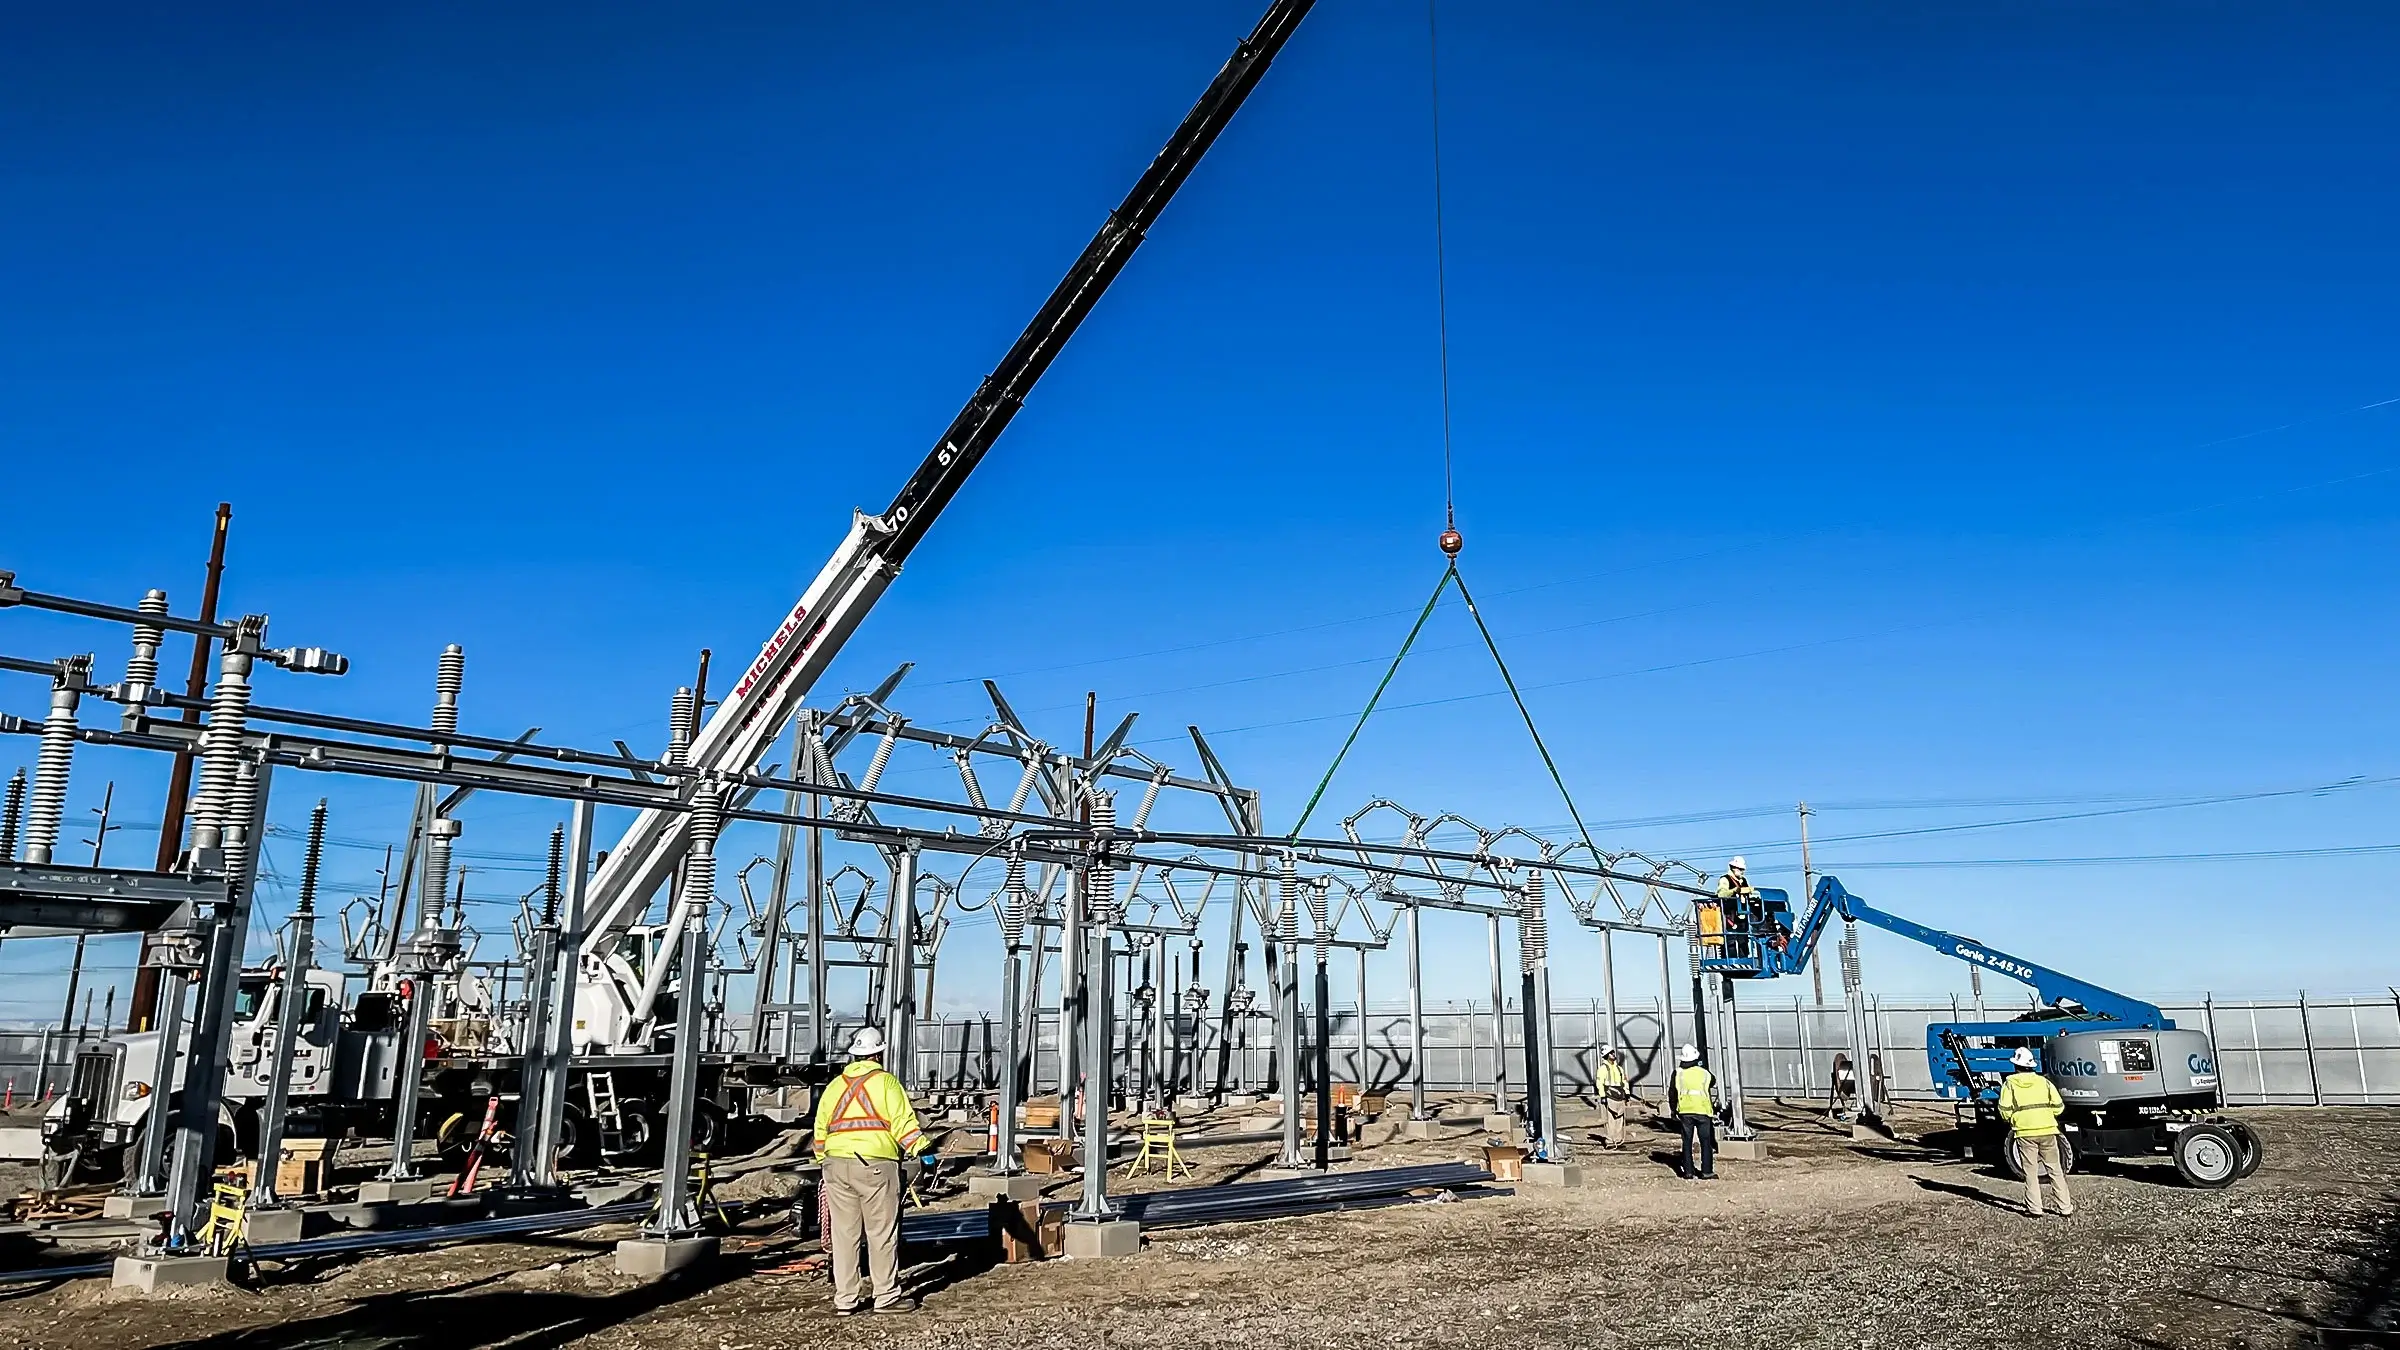 Crew working on a large power station in California.